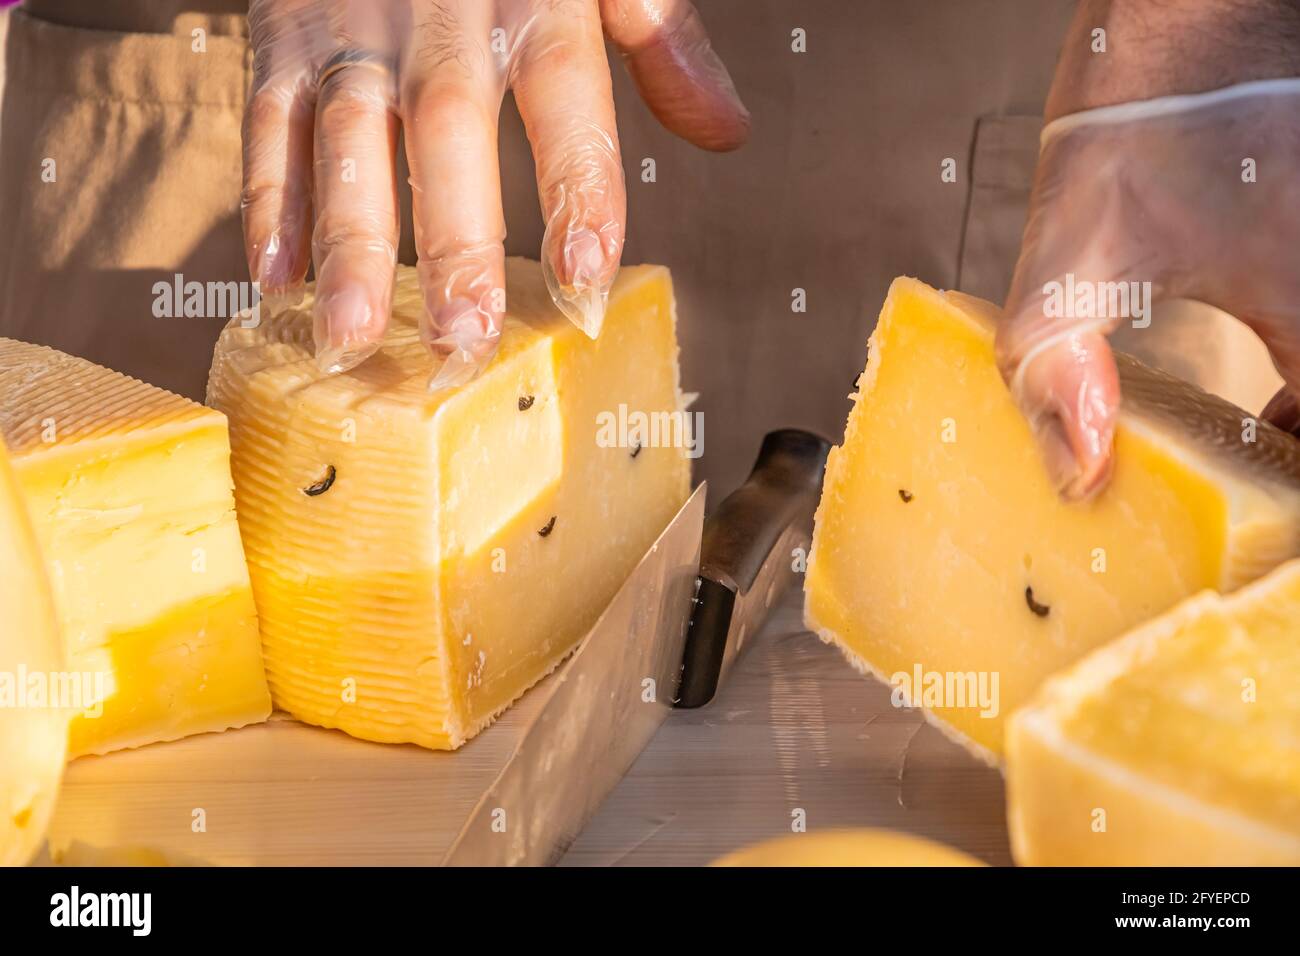 Shopkeeper's hands cutting a head of cheese close up. Artisan cheese in a street market. Cheese maker cutting cheese in his workshop. Food festival in Stock Photo